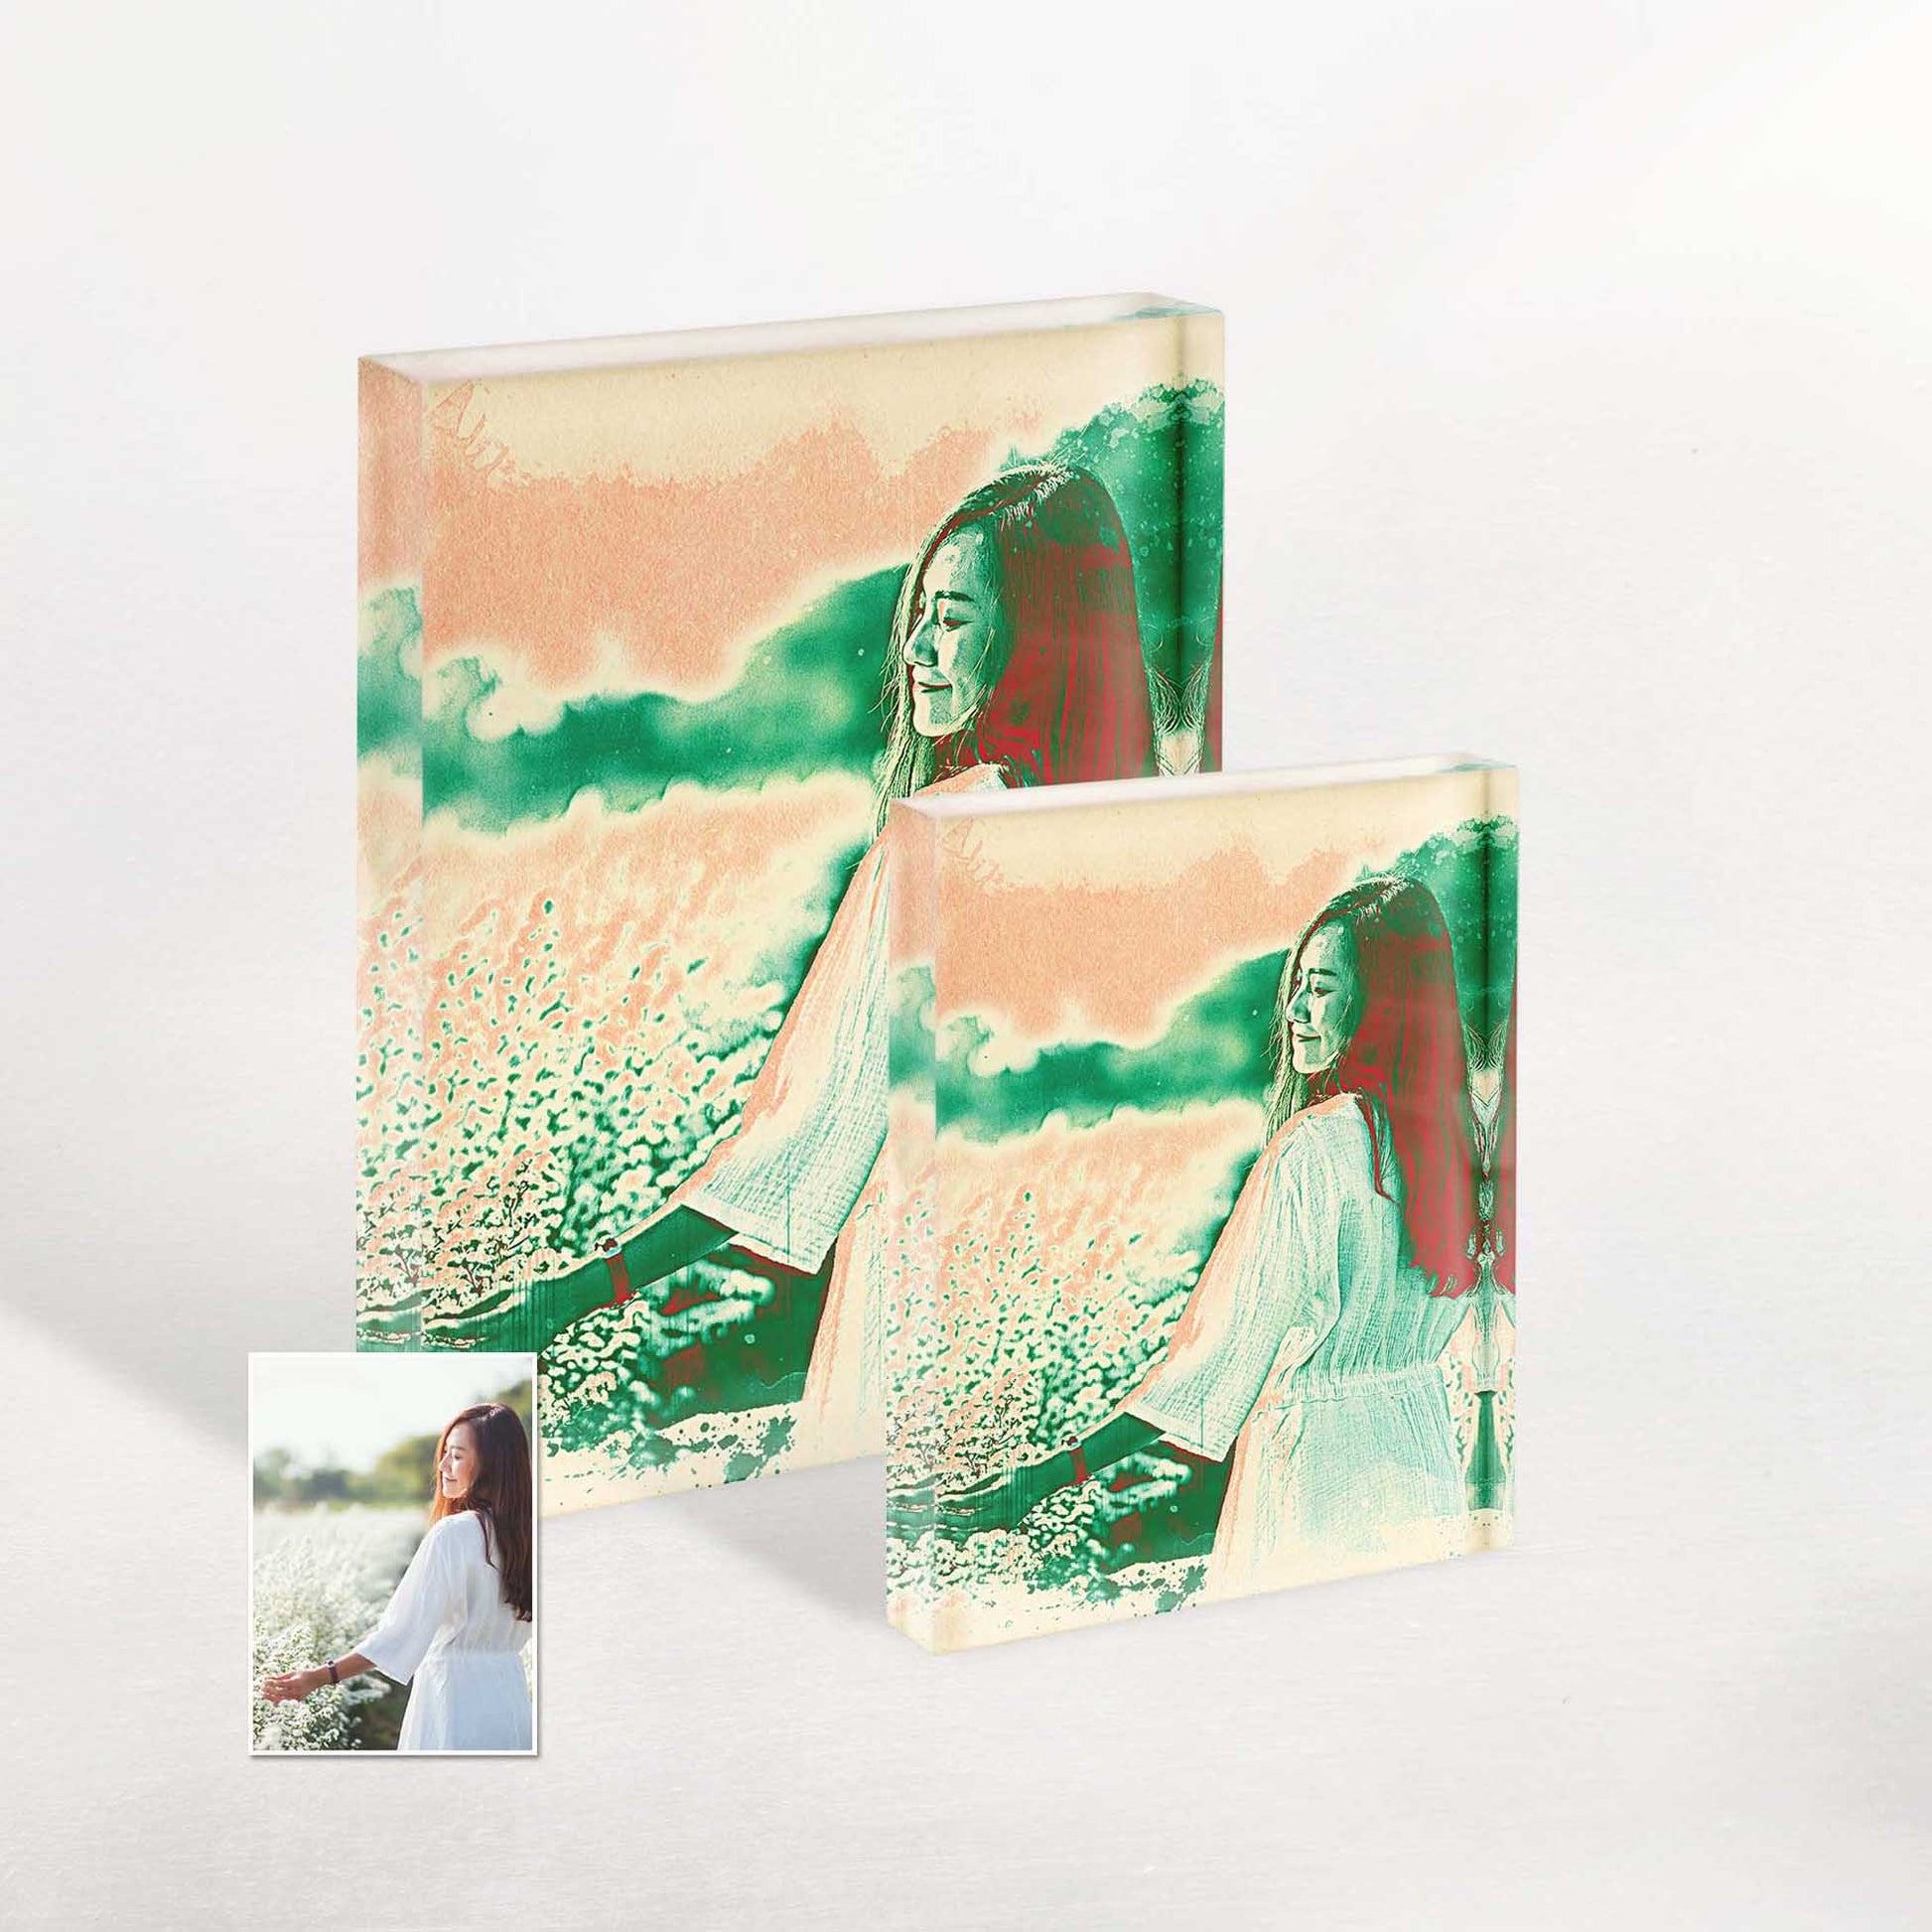 Personalize your home decor with our Personalised Architect Watercolor Acrylic Block Photo. Crafted from your own photo, this cool and creative artwork captures the intricate details of architecture in a chic